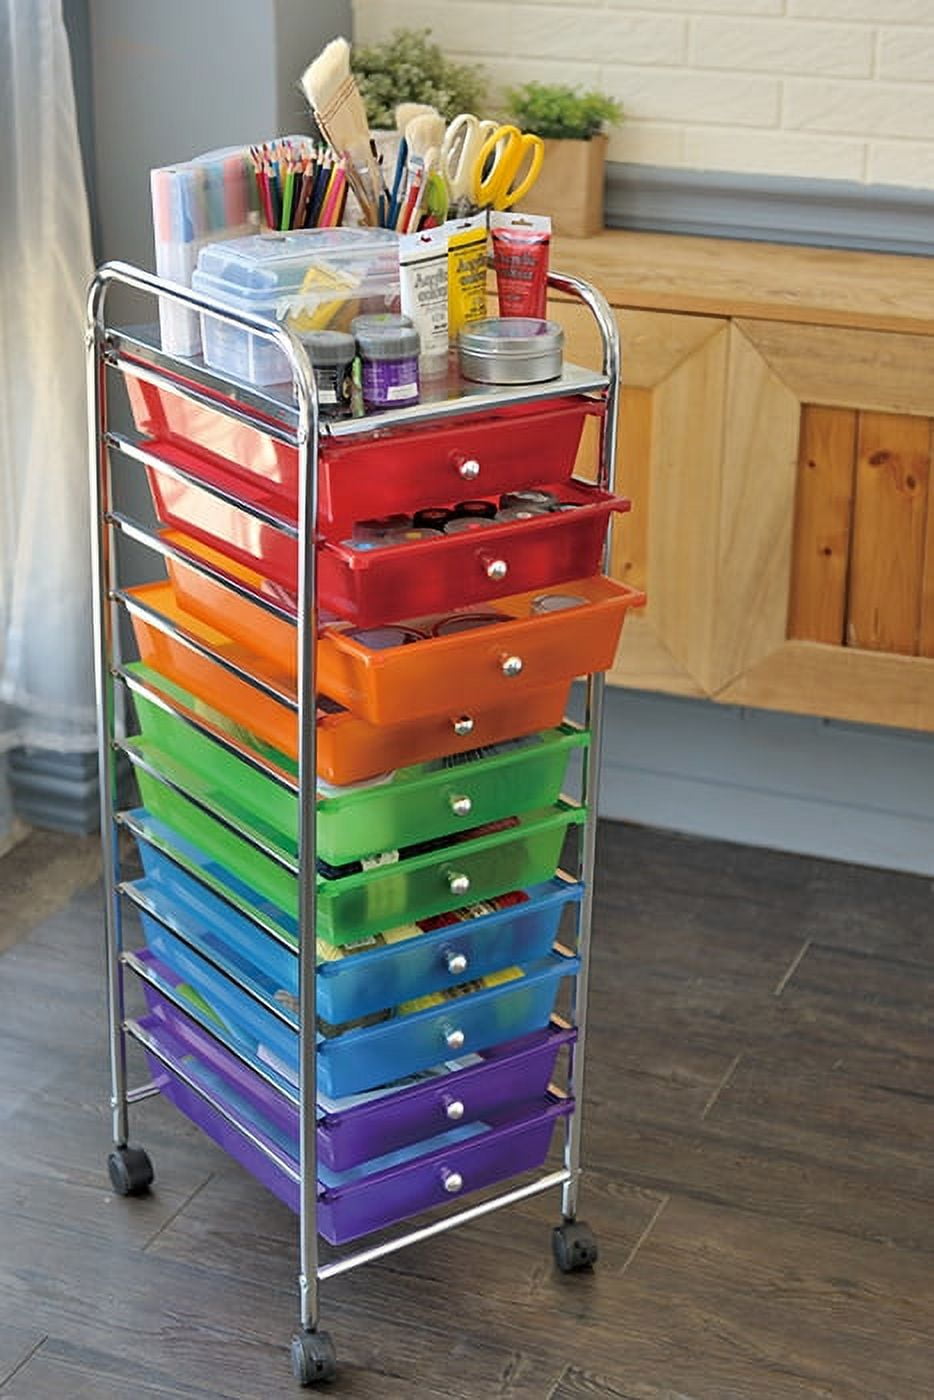 5 Drawer Rolling Cart by Simply Tidy™ in Rainbow